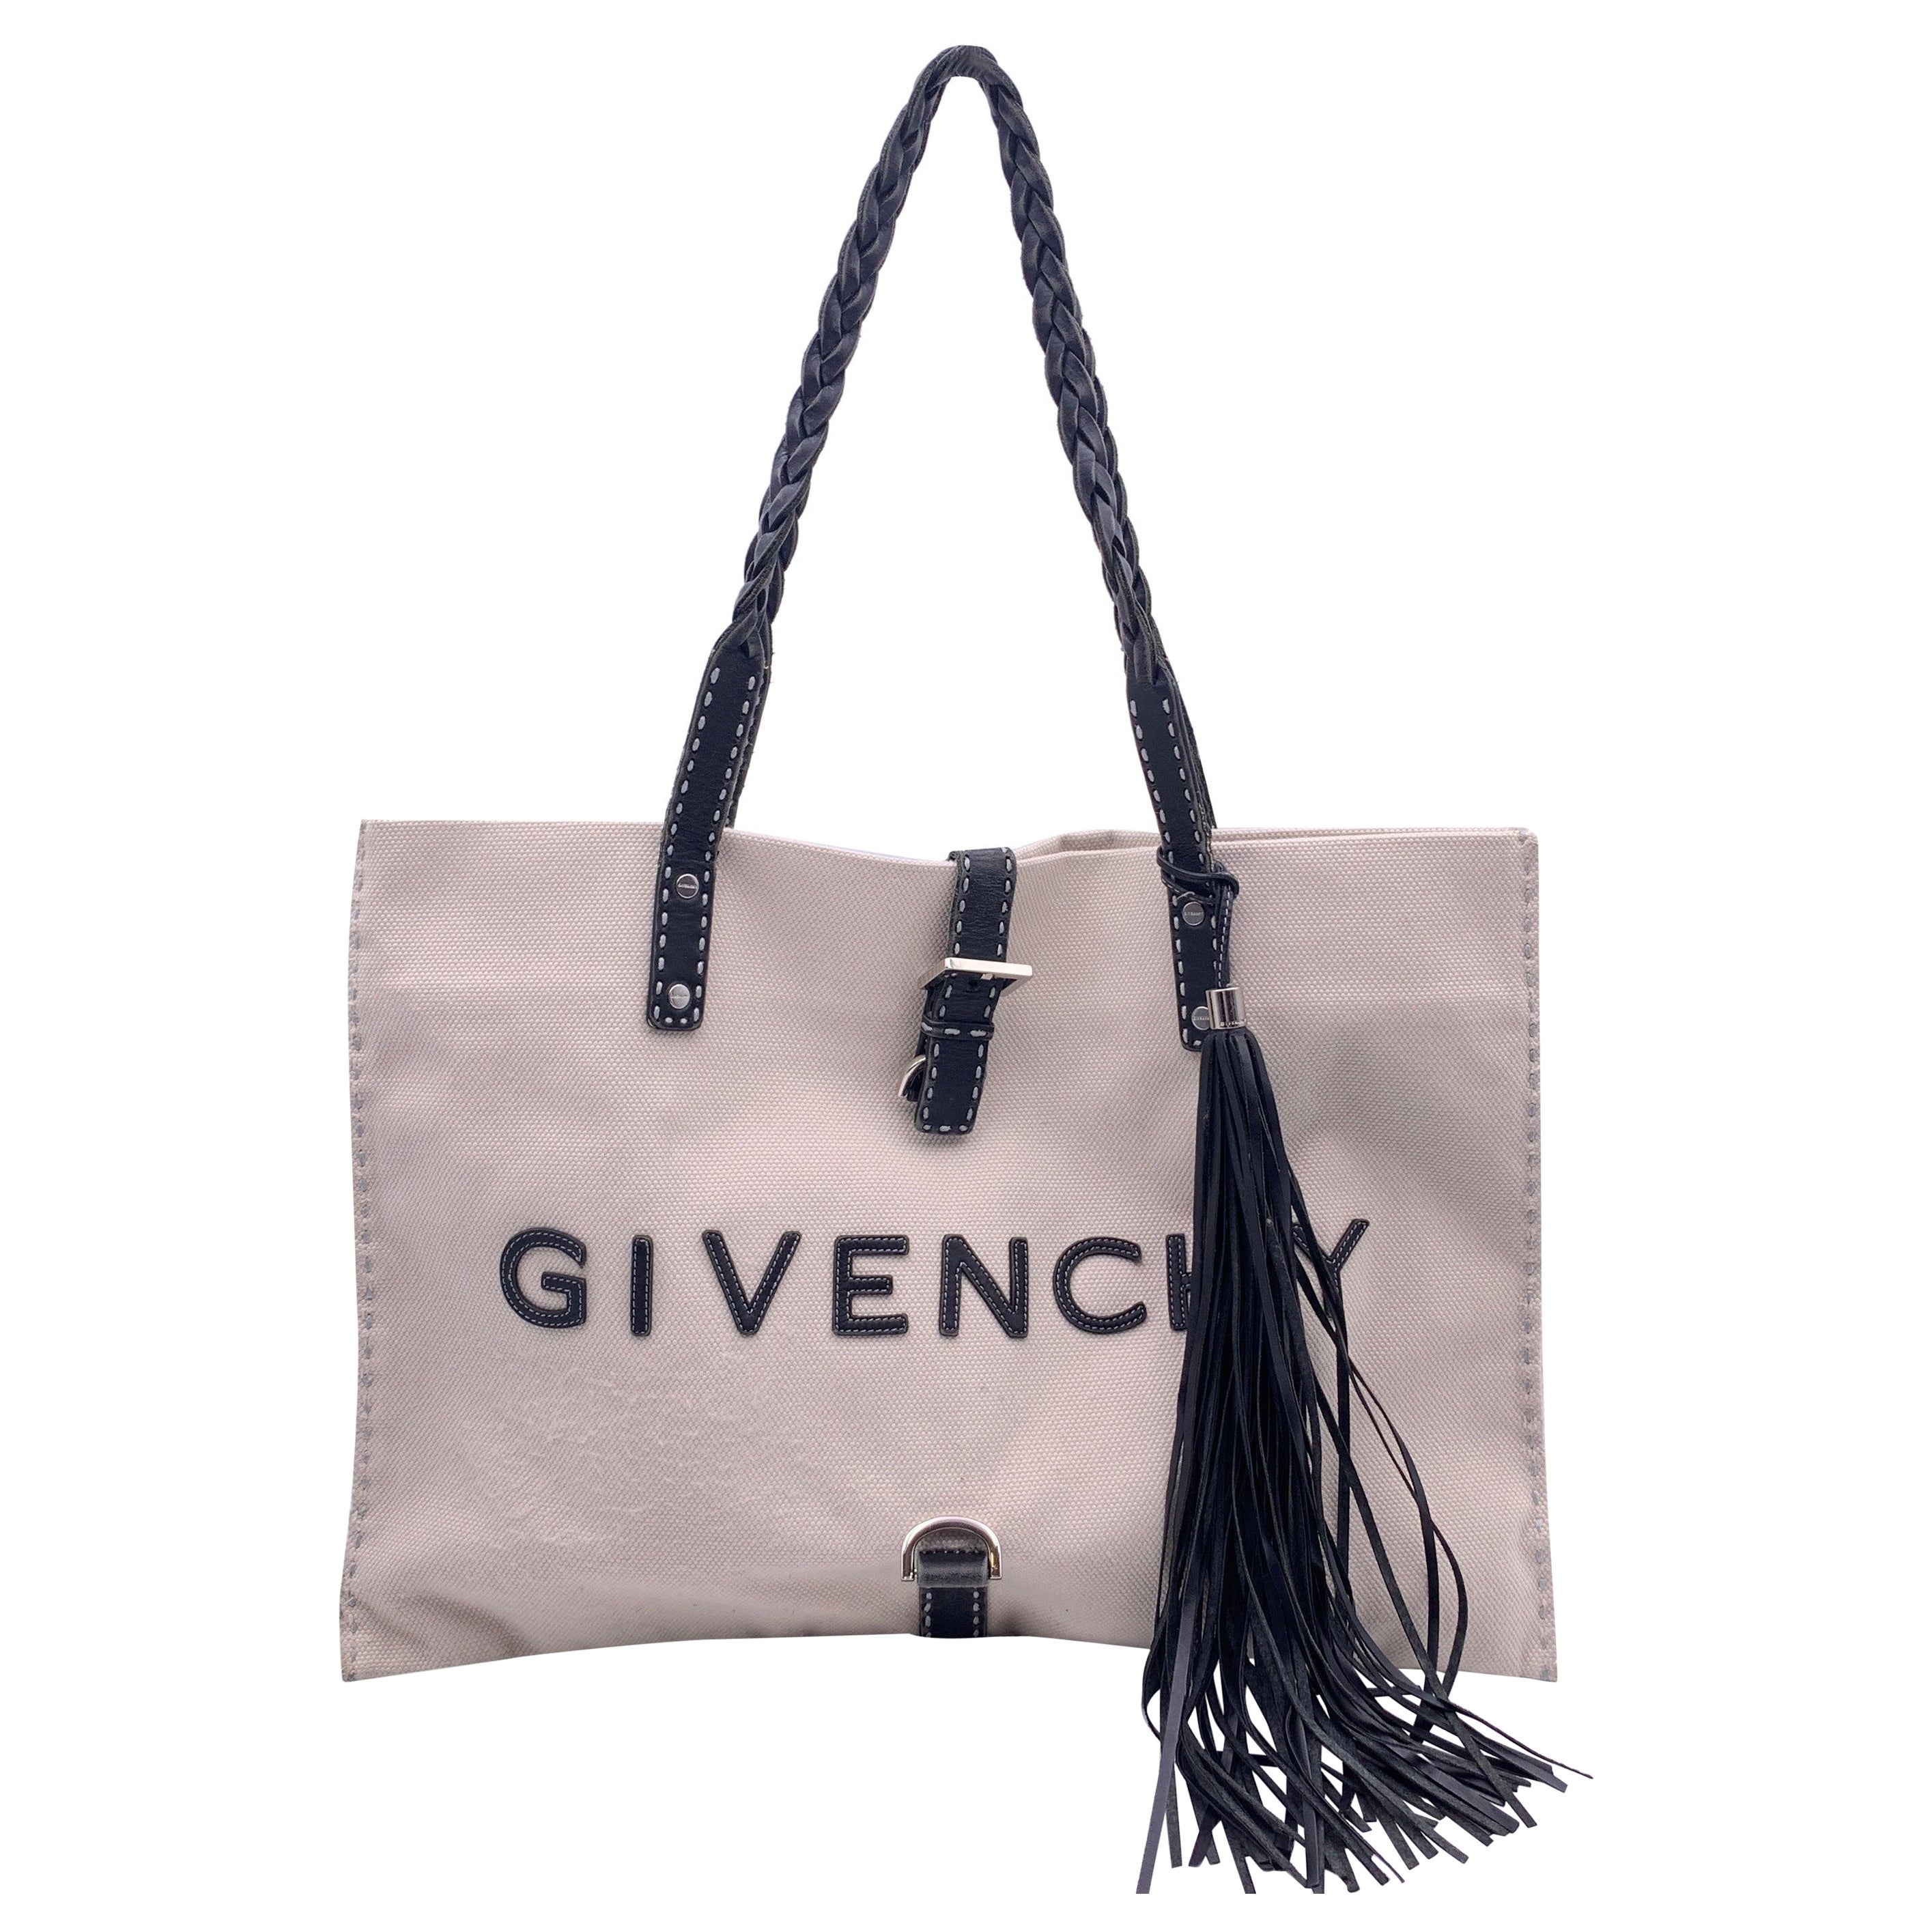 Givenchy Beige Canvas and Black Leather Logo Tote Shopping Bag